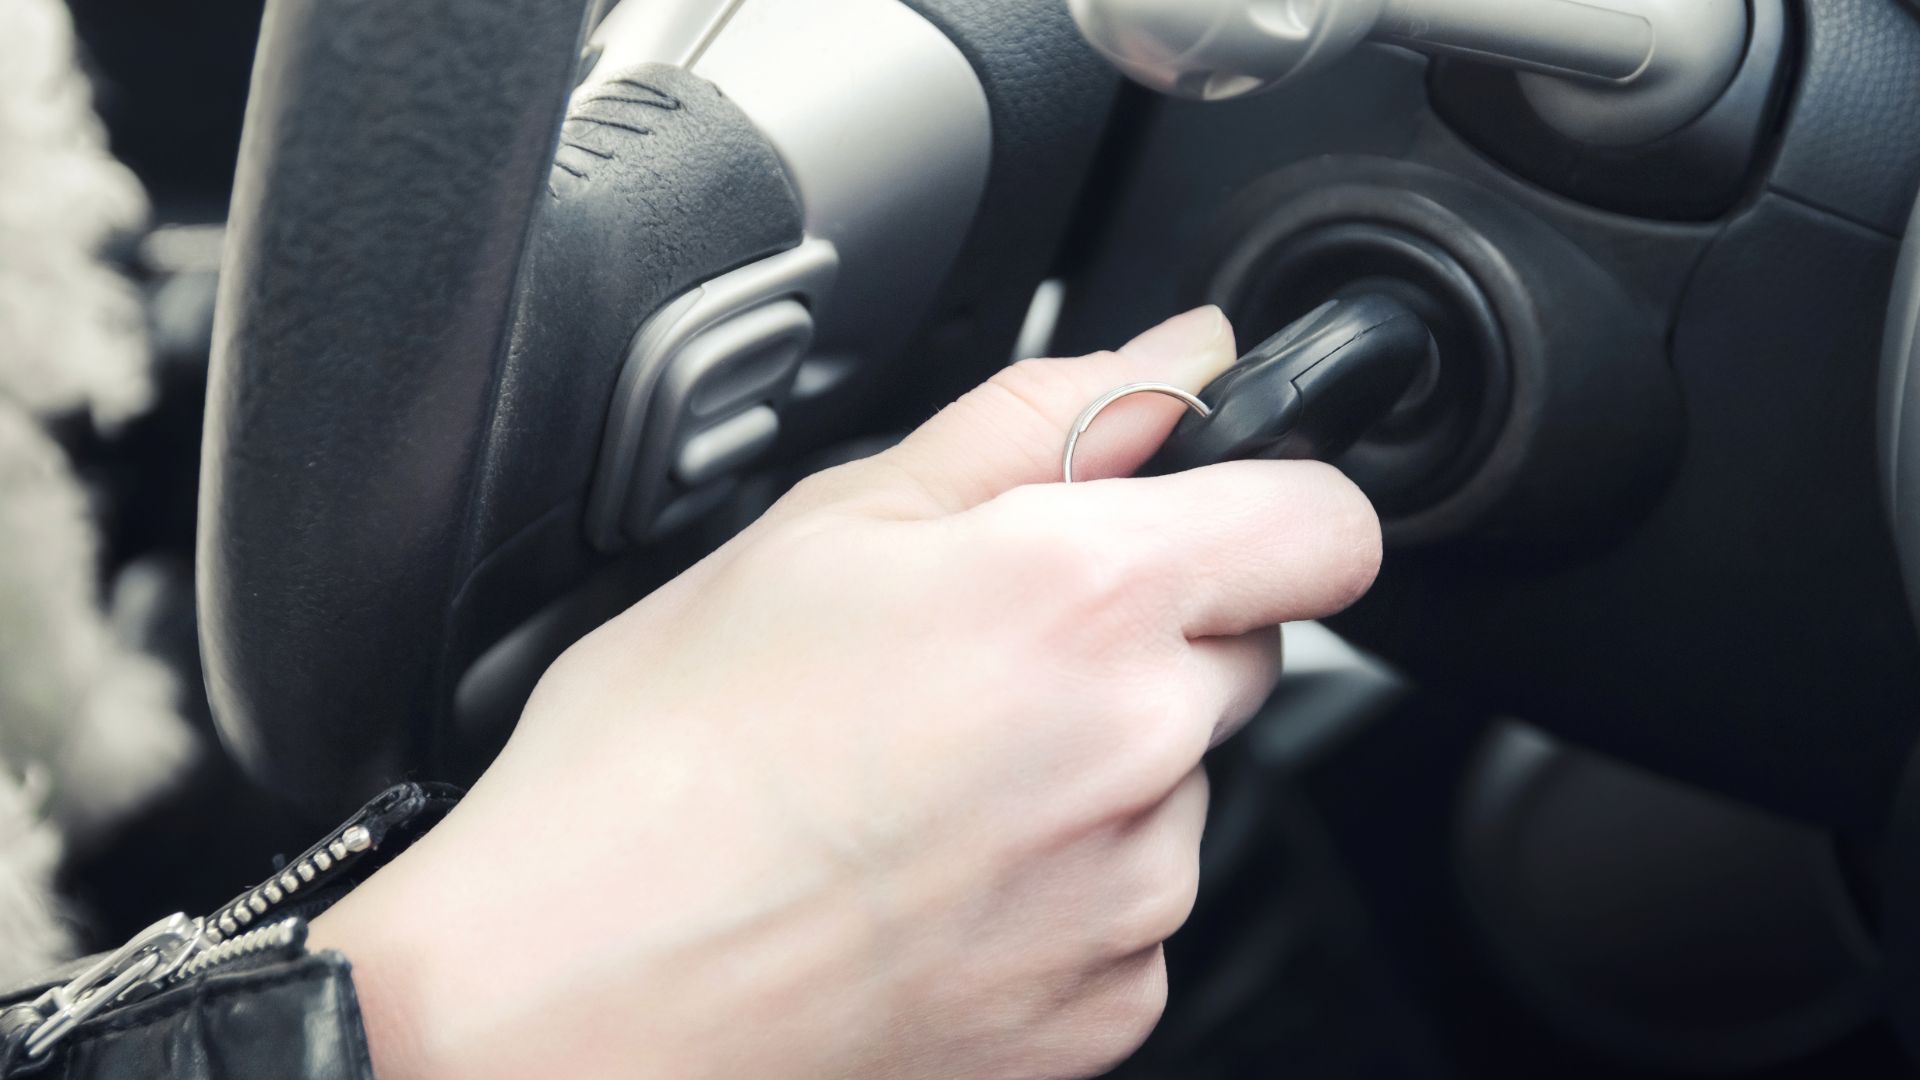 a person holding a cell phone while driving a car.